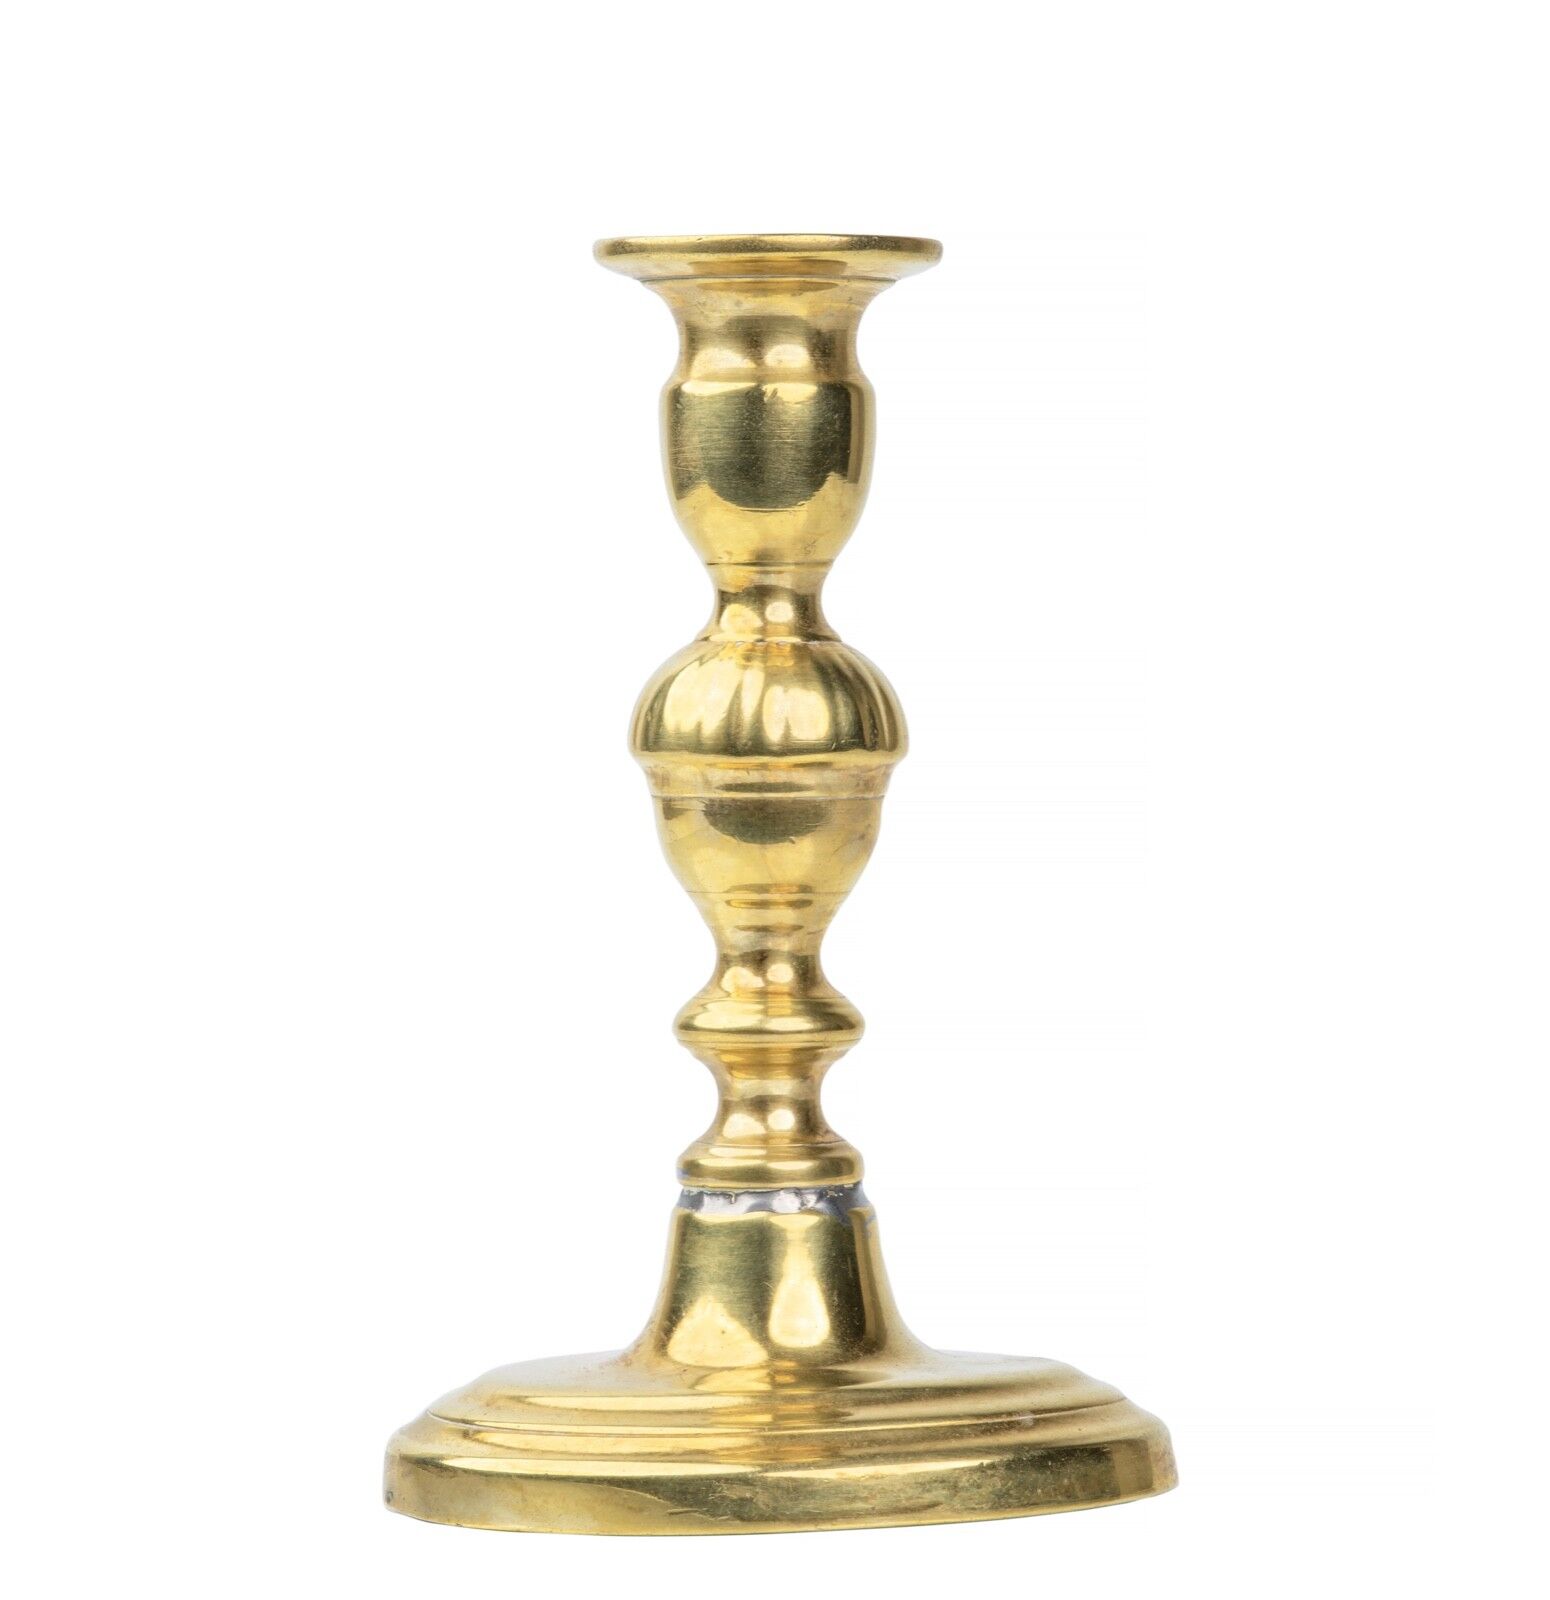 An Early Brass 18th/19th Century Candlestick